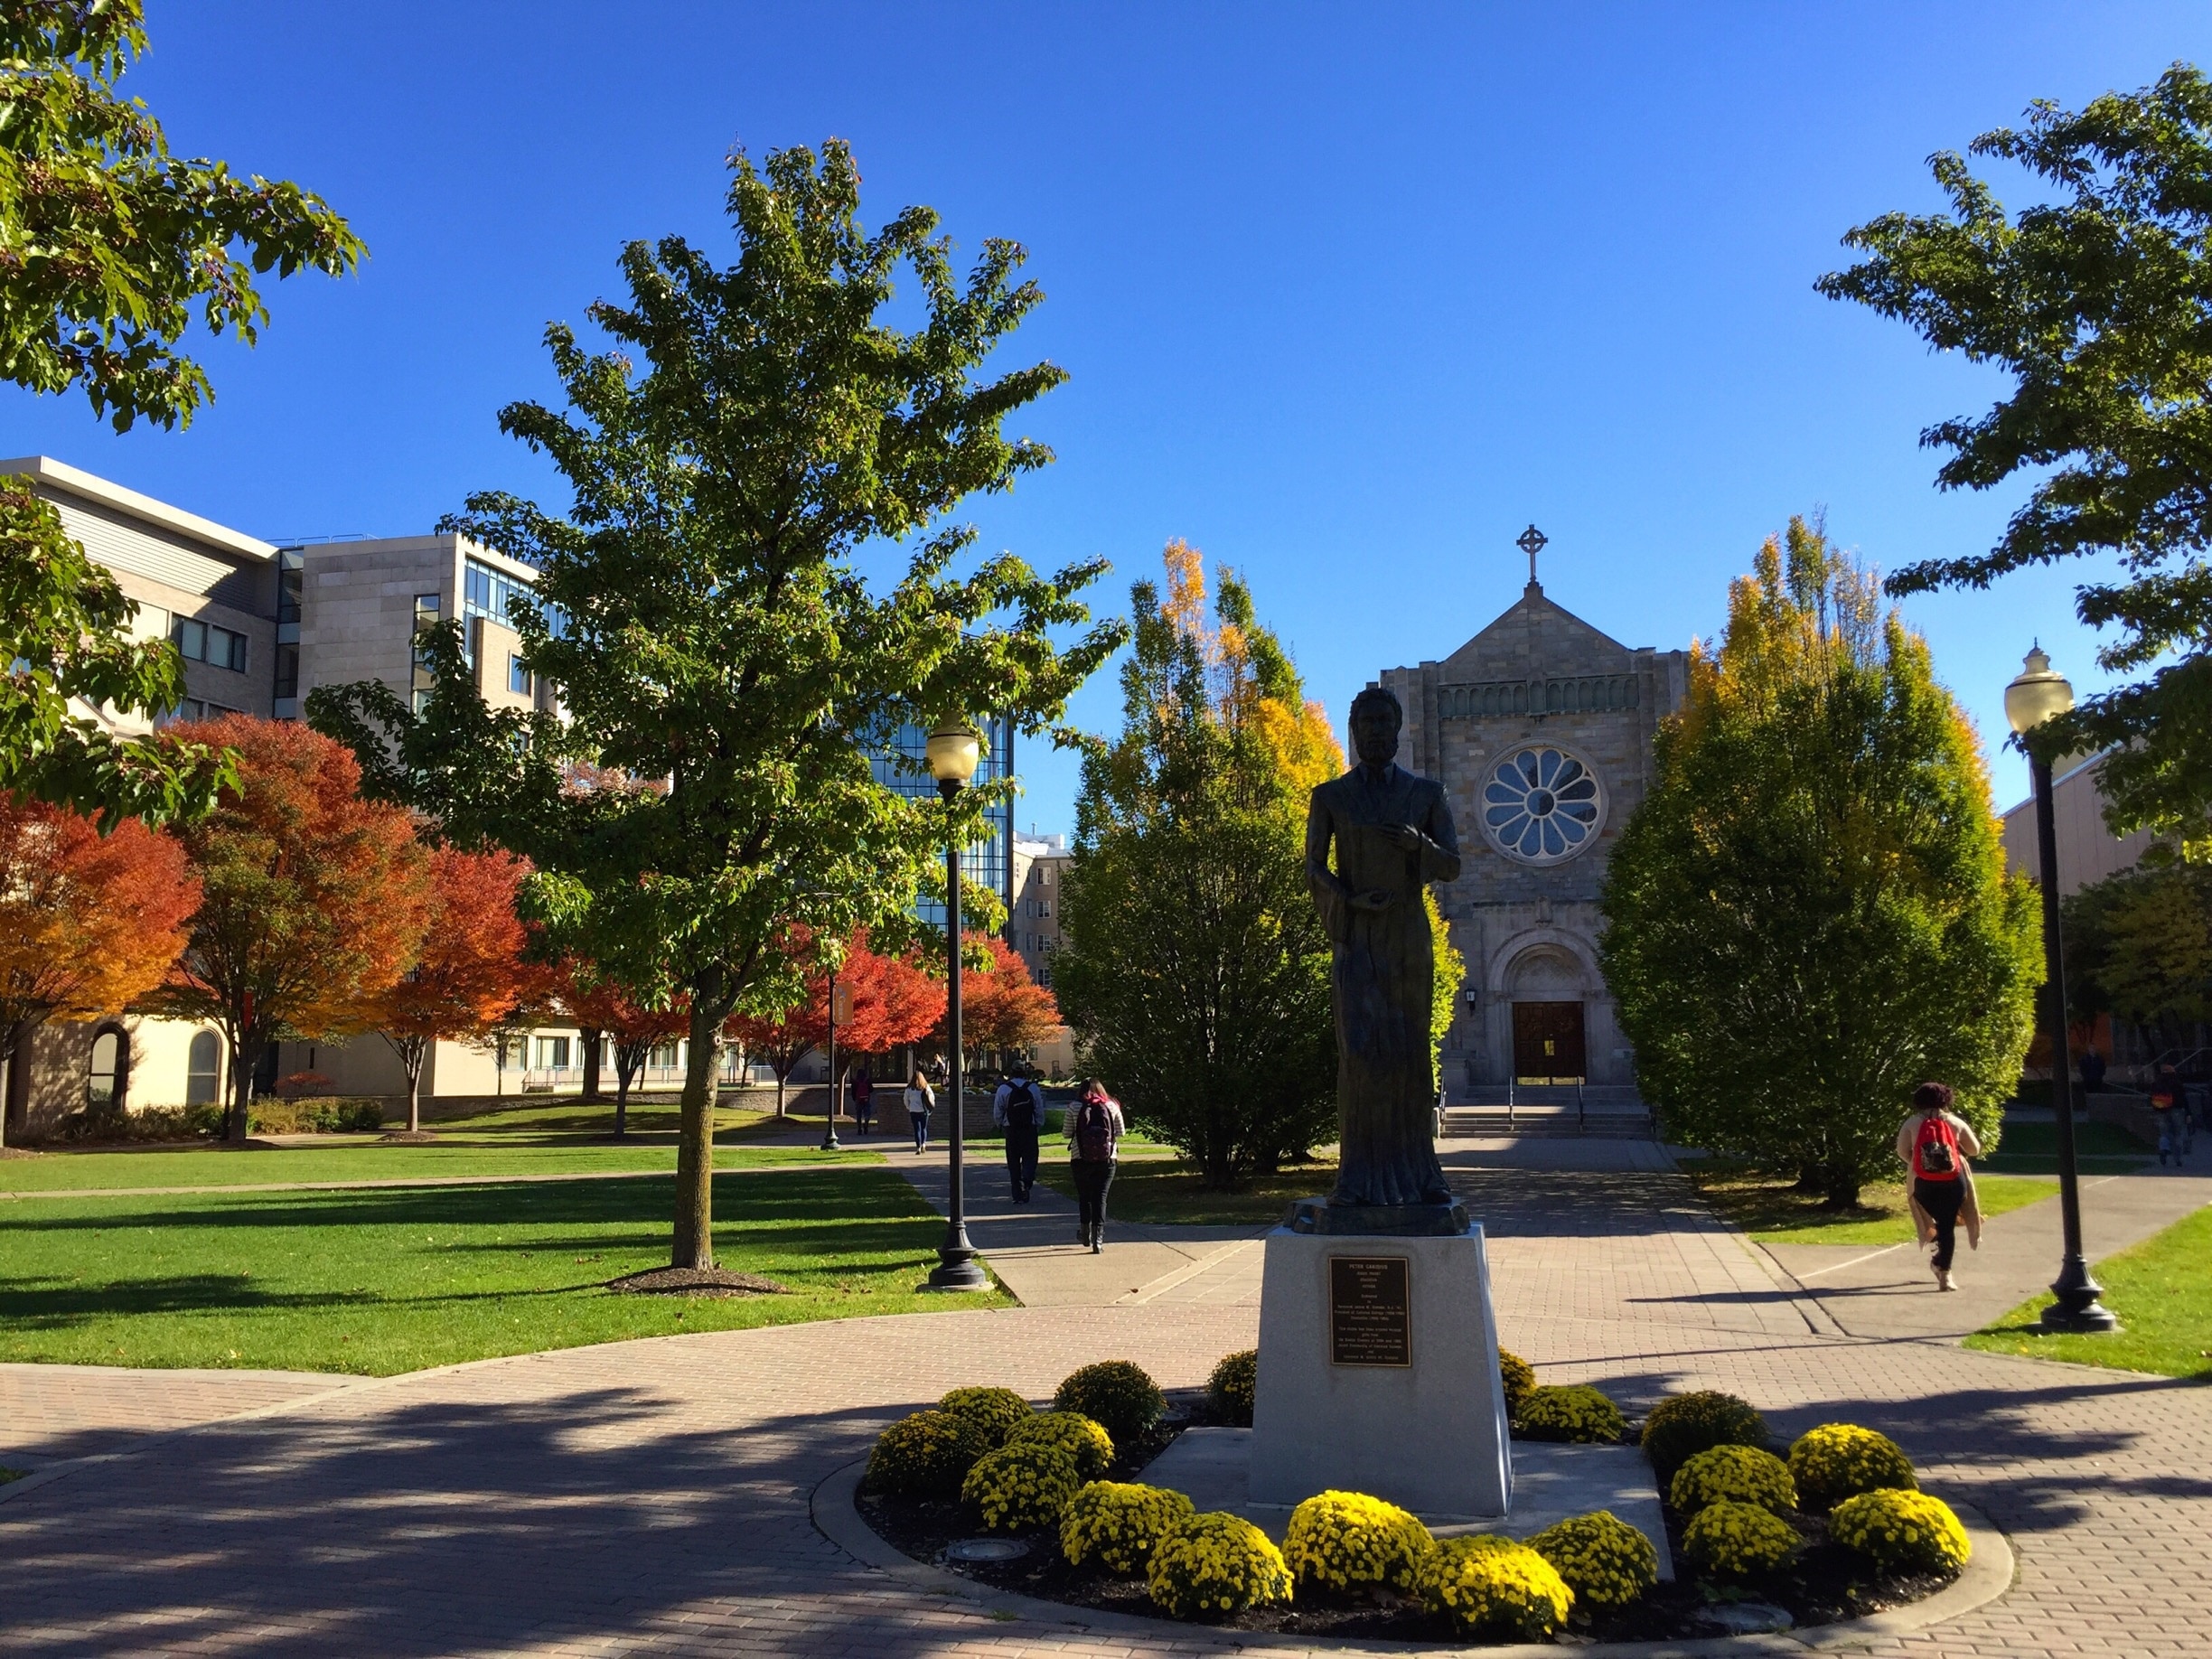 The center of campus at my alma mater, Canisius College, on a beautiful fall day.

#gogriffs
#lifeatexpedia